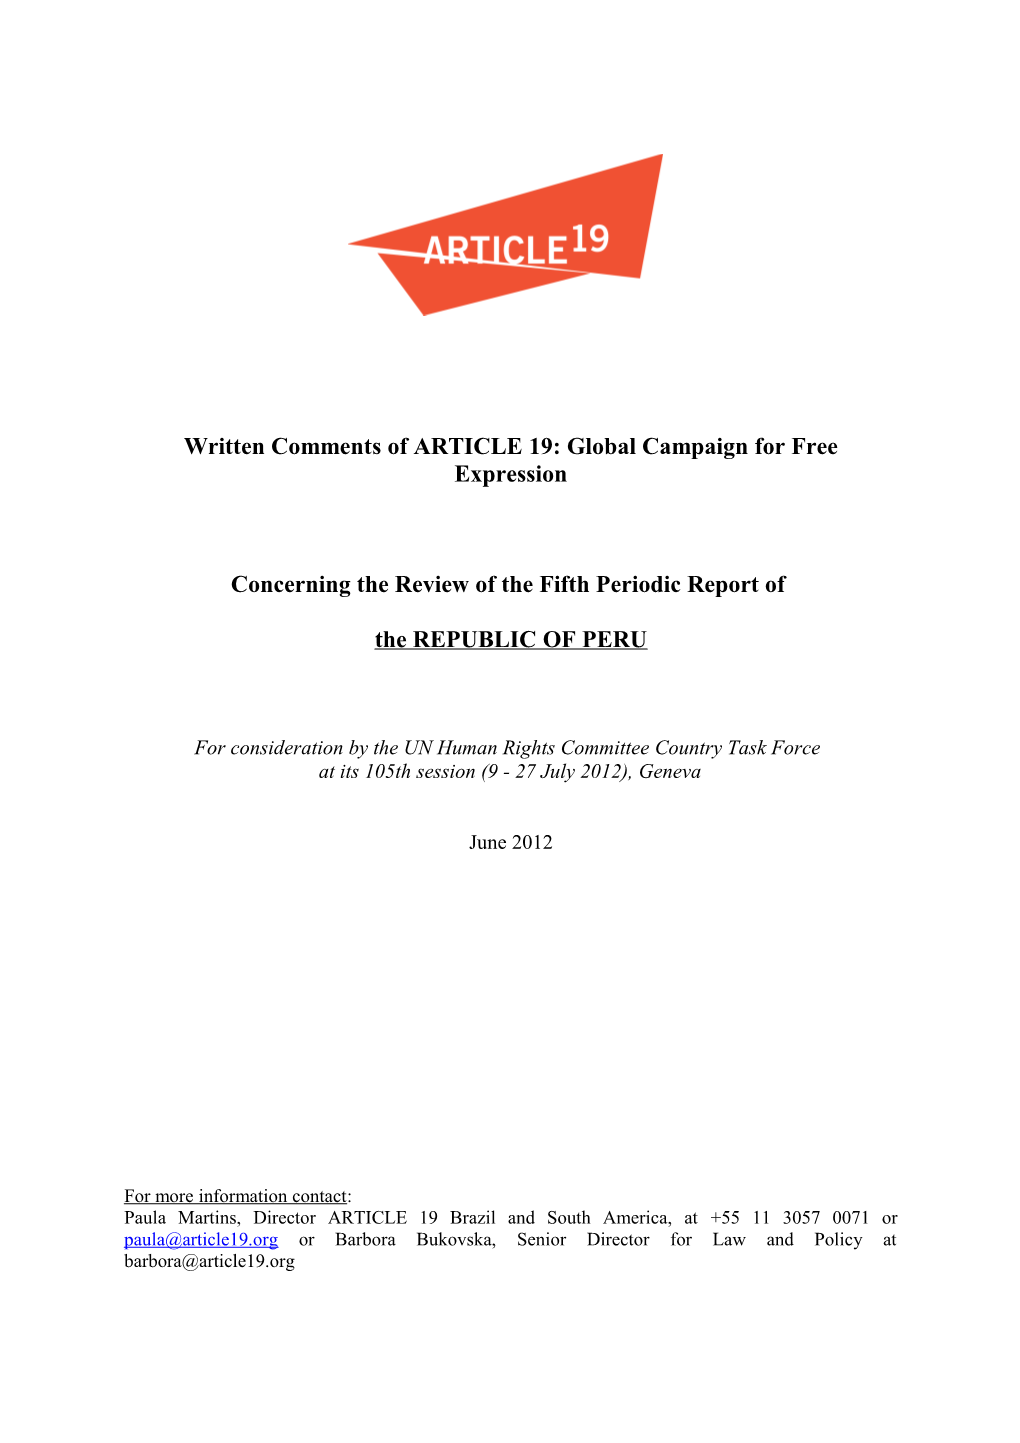 Written Comments of ARTICLE 19: Global Campaign for Free Expression